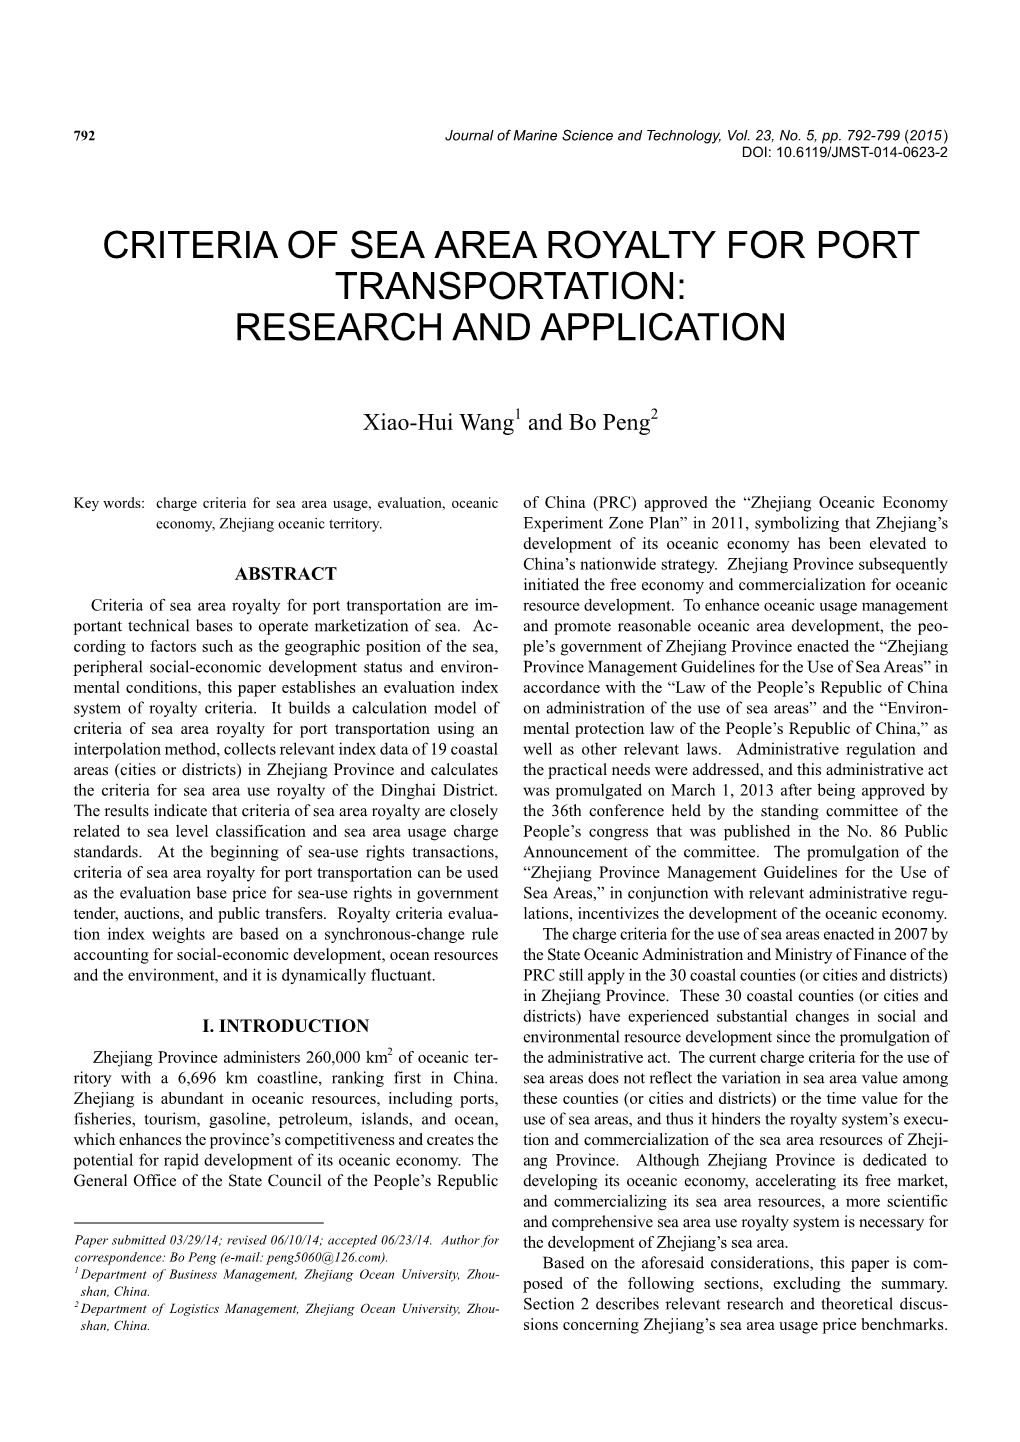 Criteria of Sea Area Royalty for Port Transportation: Research and Application